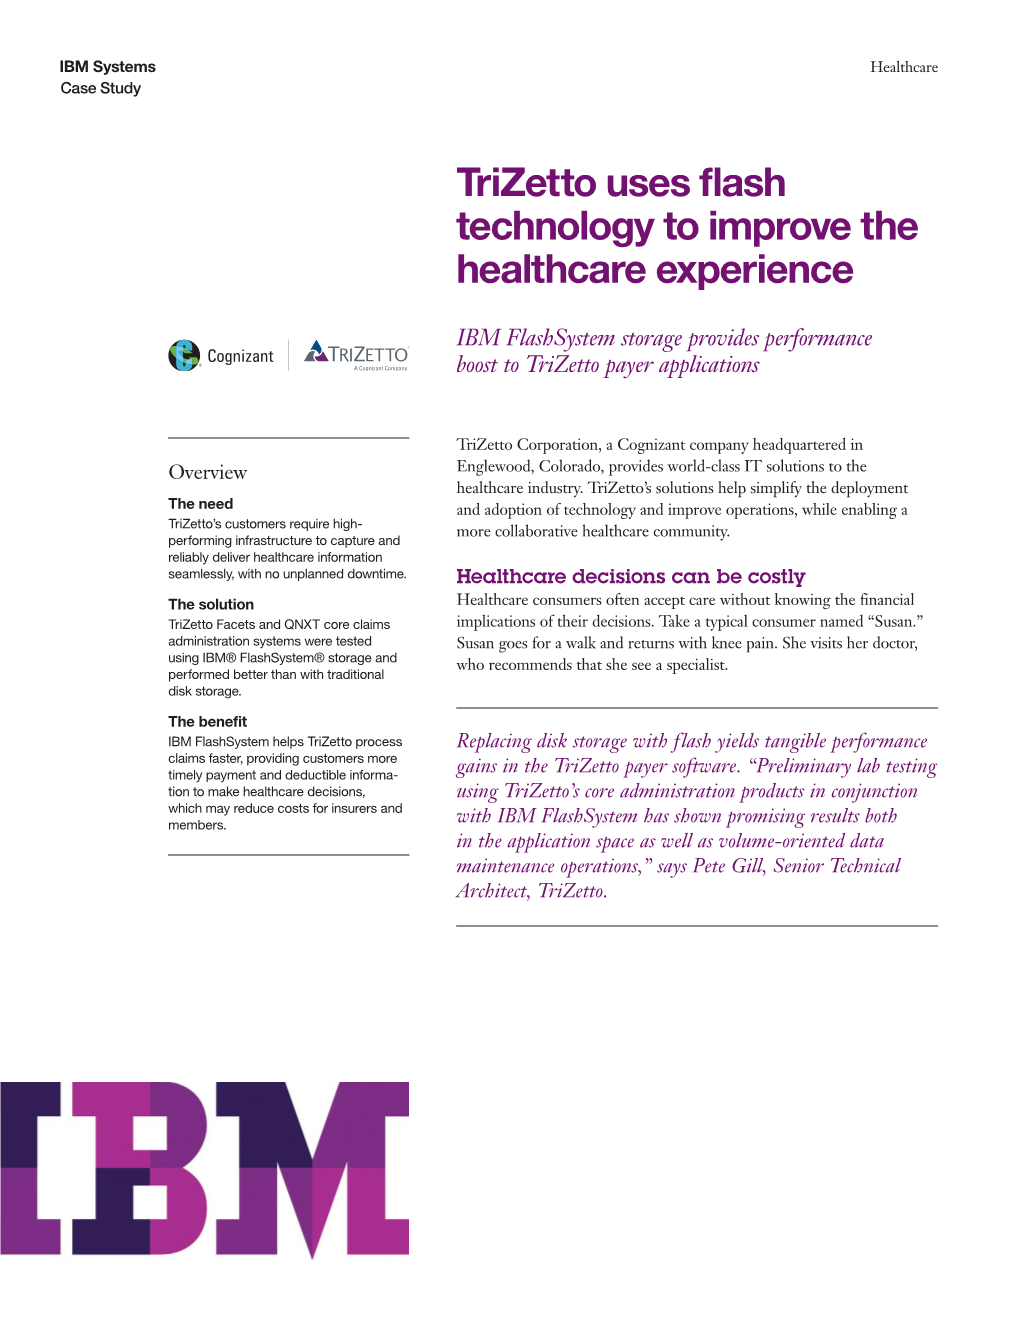 Trizetto Uses Flash Technology to Improve the Healthcare Experience